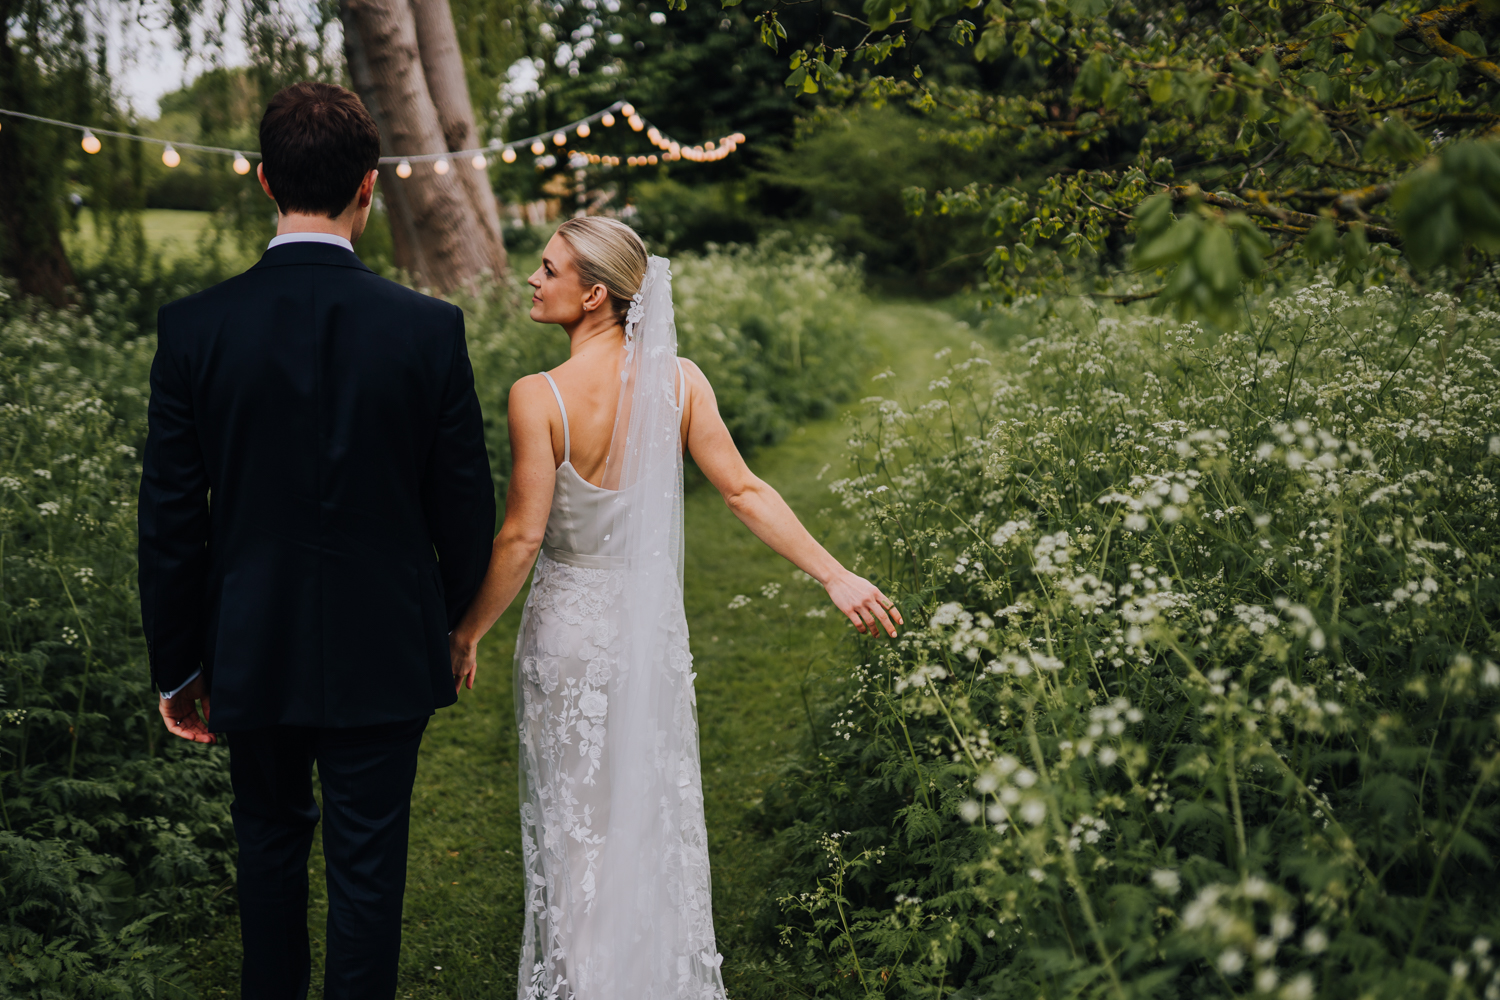 Bridal Two Piece at Garden Party Wedding in the Cotswolds